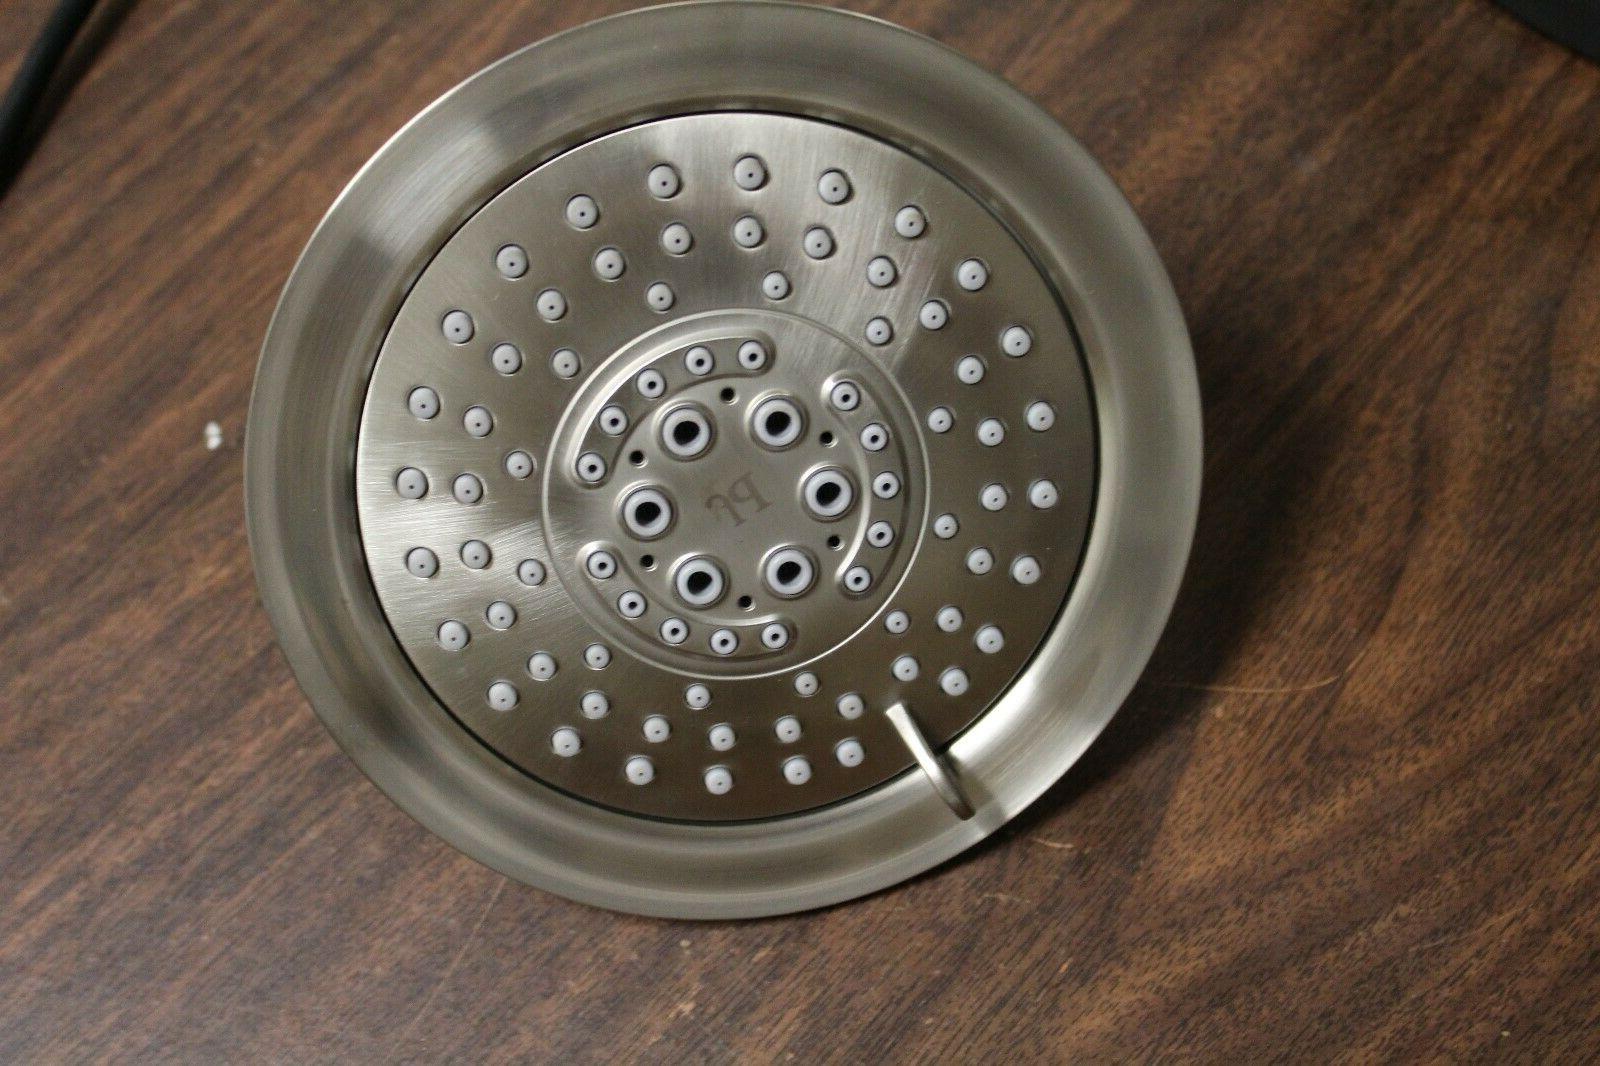 How To Remove Water Saver From A Price Pfister’s Showerhead